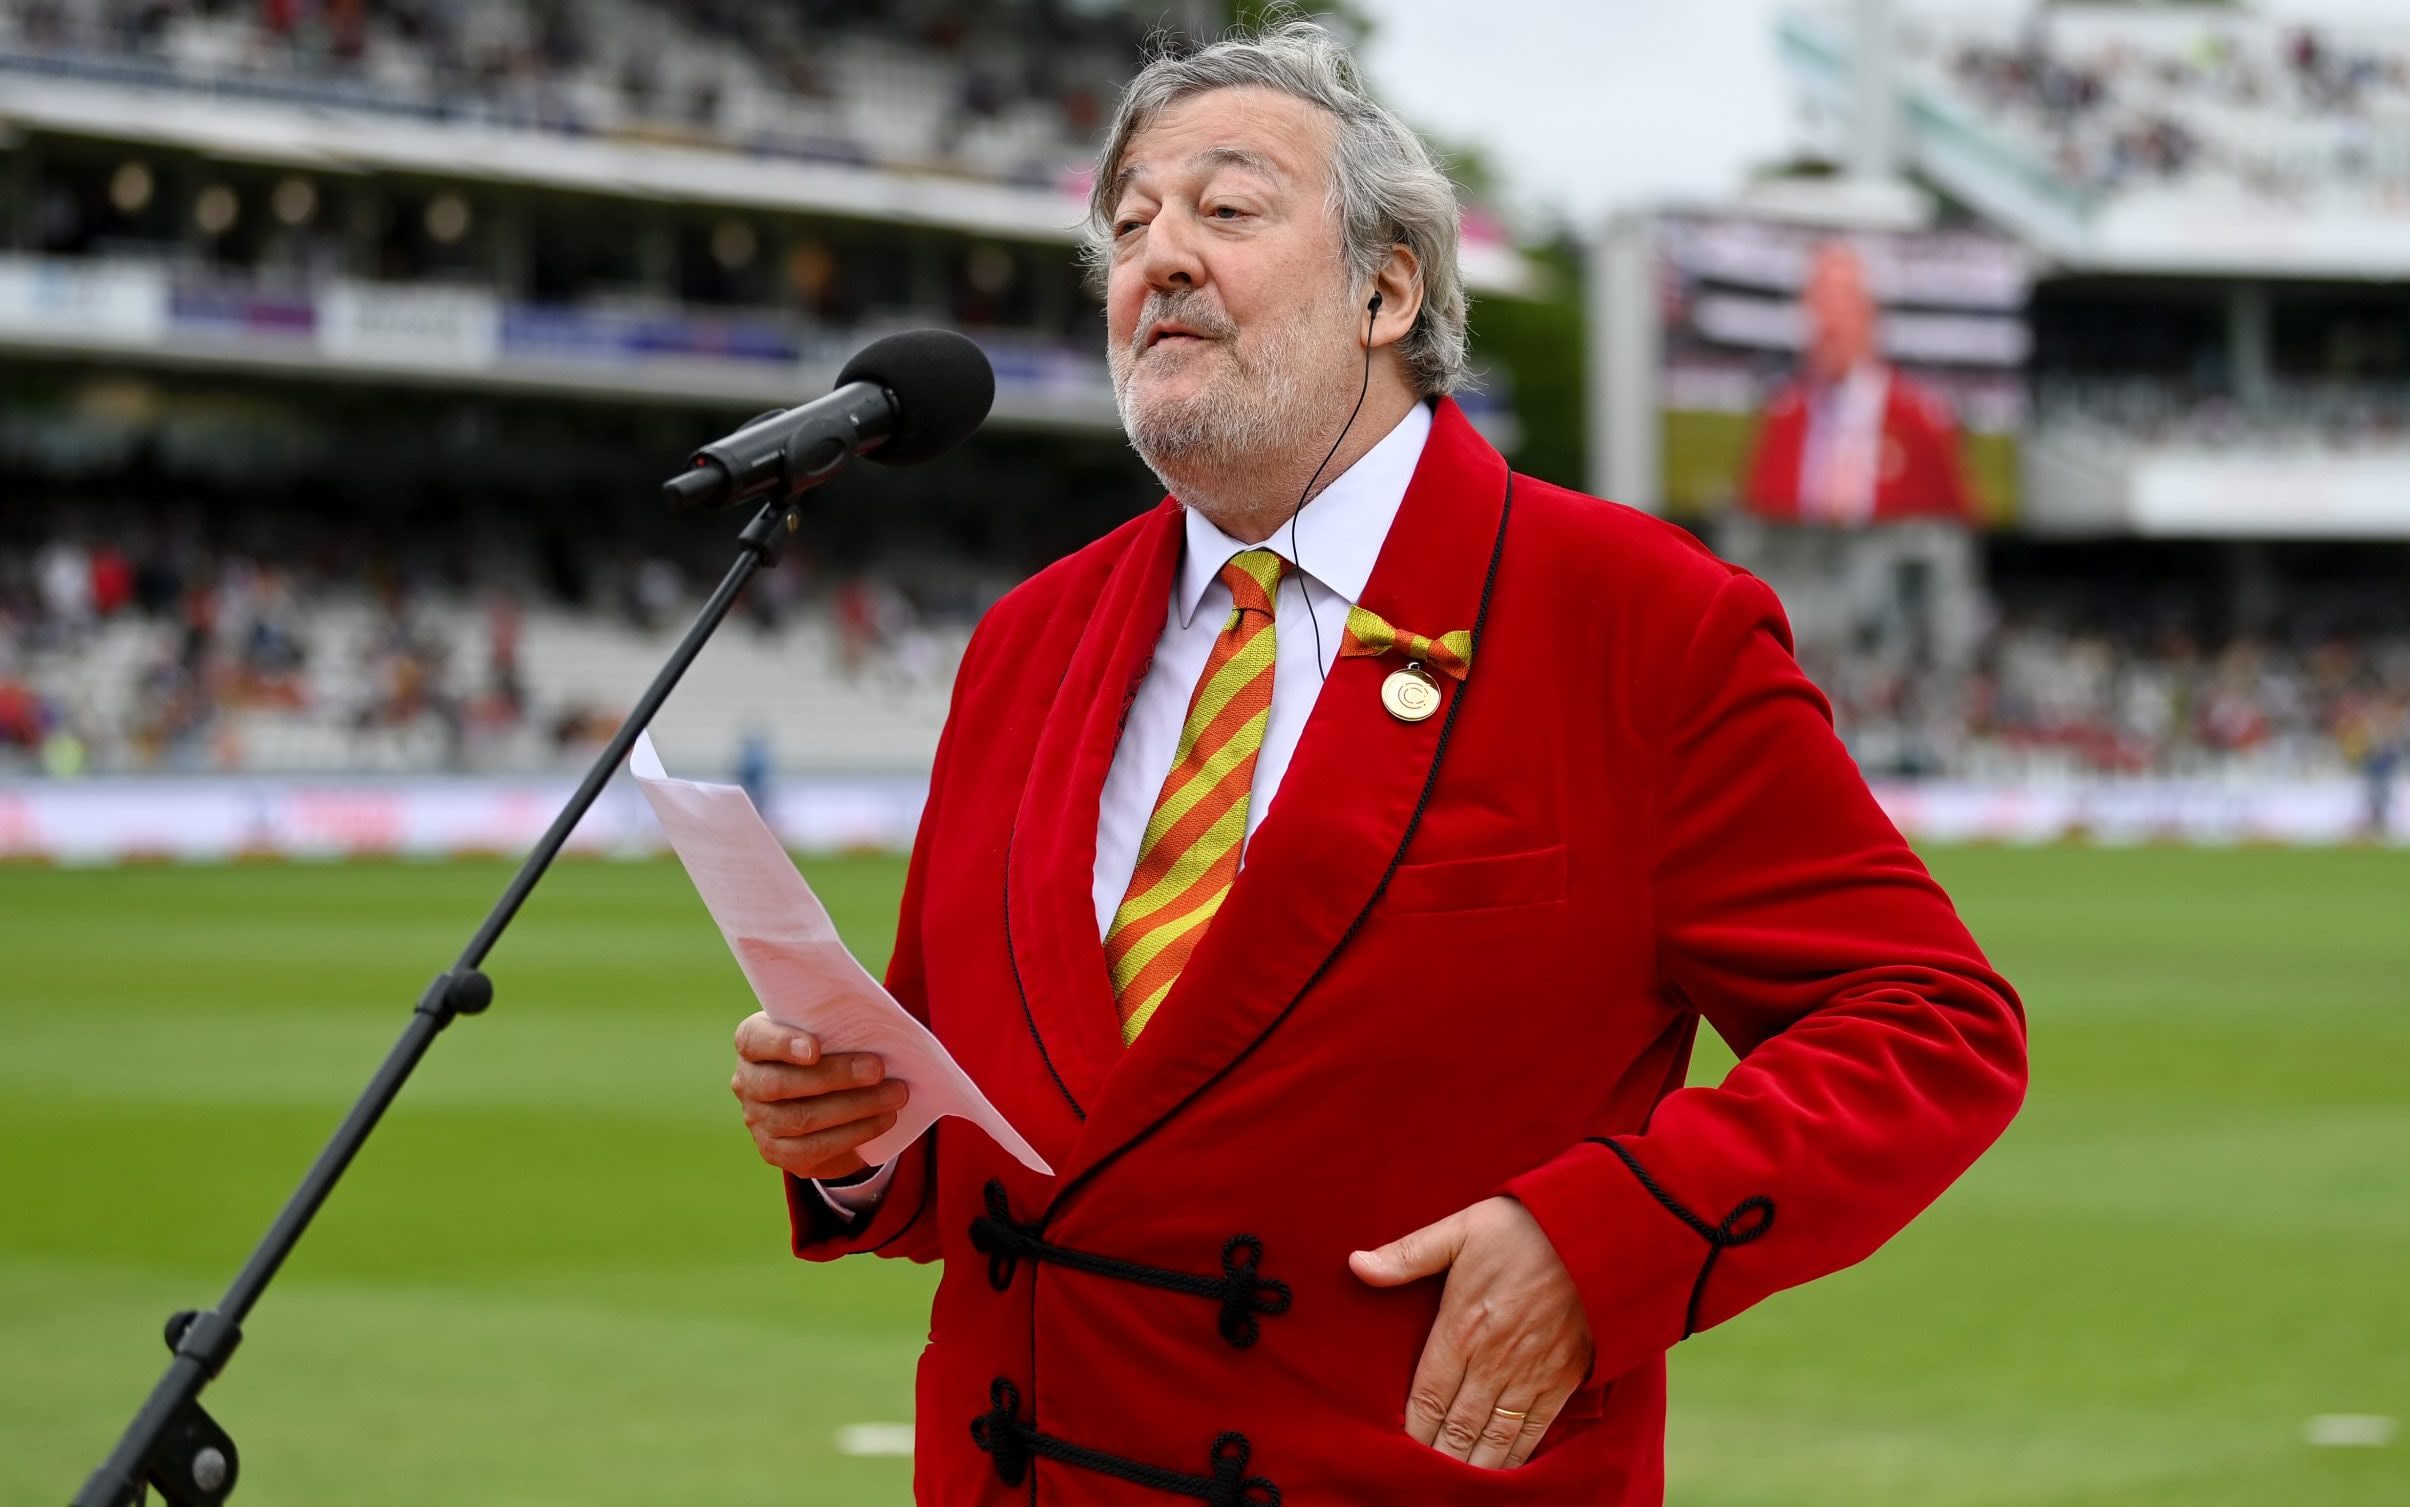 Ignorant MCC tirade by Stephen Fry fuelling abuse of middle-aged white men